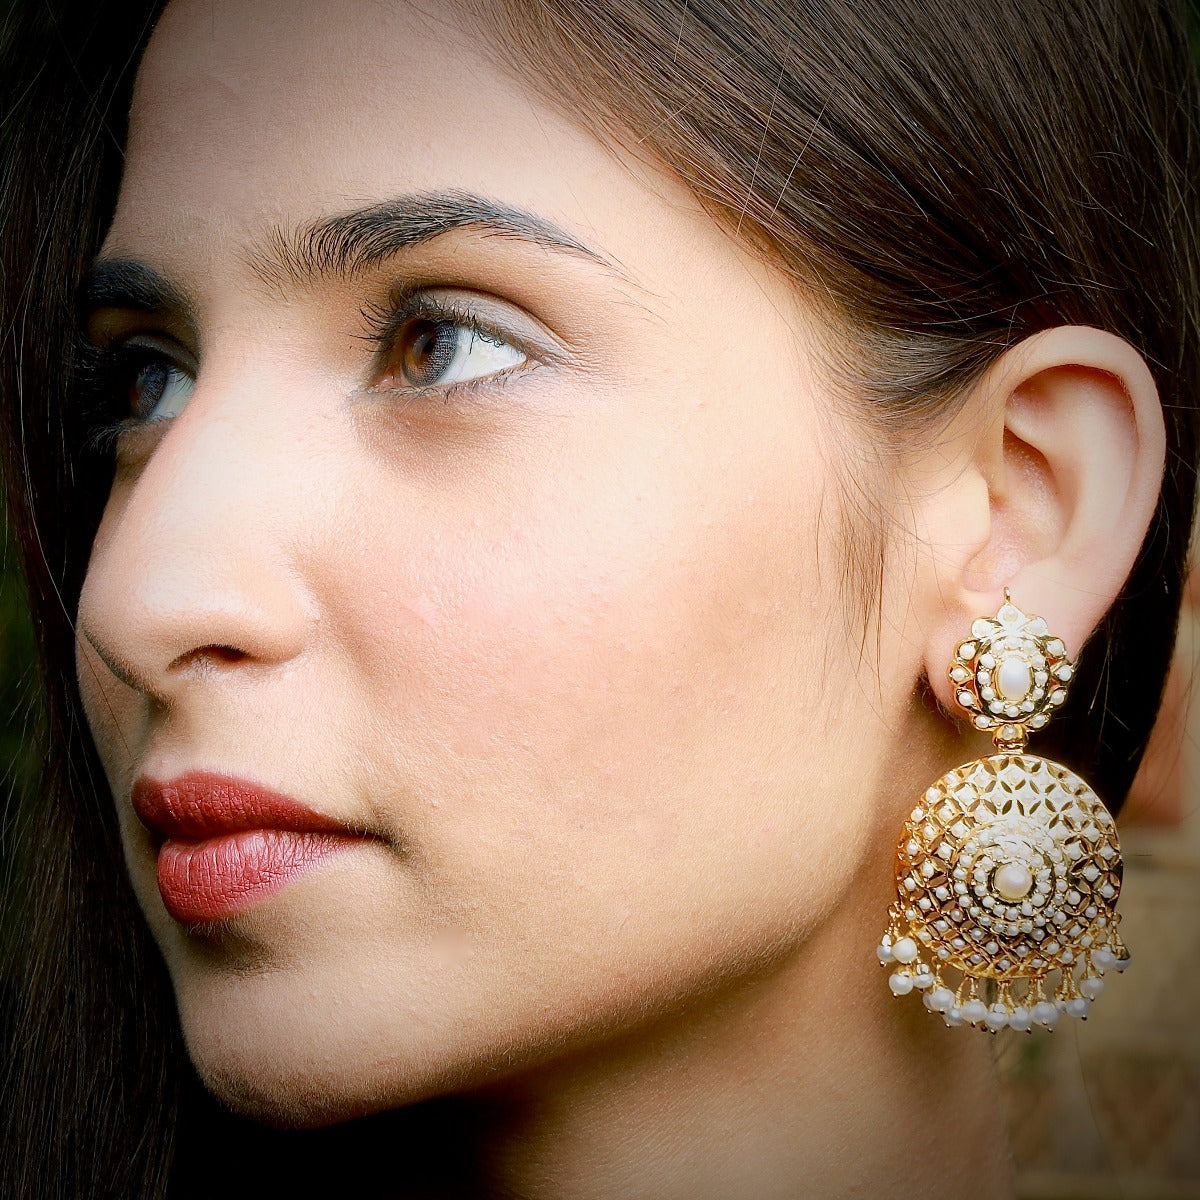 Authentic Pearl Earrings | Large Round Earrings on Gold Plated Silver ER 025